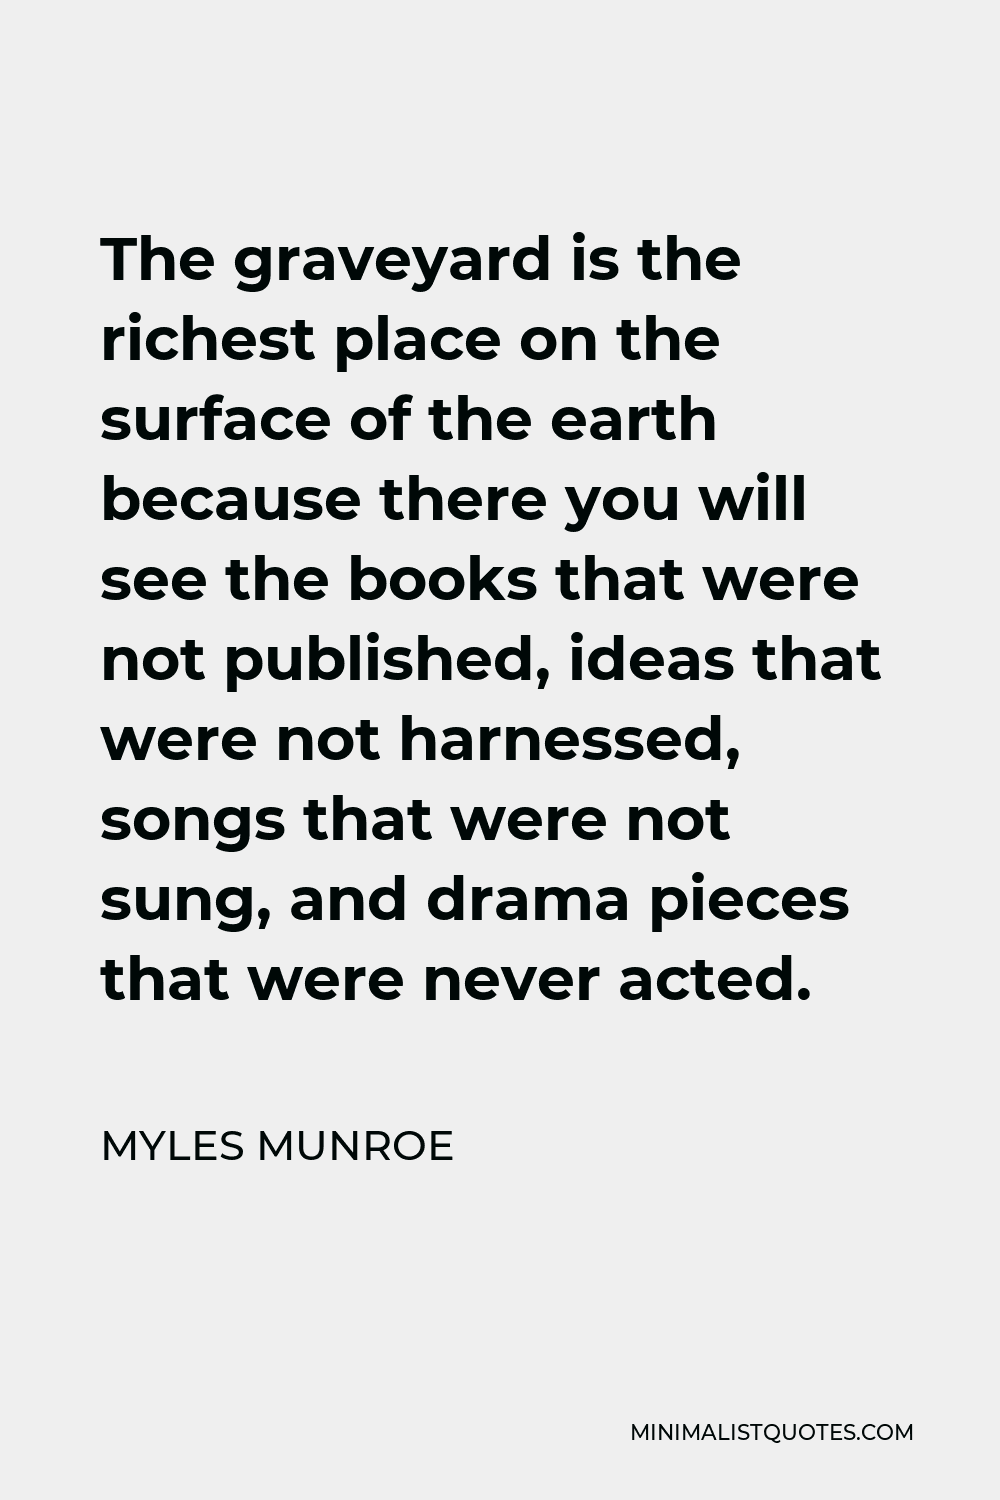 Myles Munroe Quote - The graveyard is the richest place on the surface of the earth because there you will see the books that were not published, ideas that were not harnessed, songs that were not sung, and drama pieces that were never acted.